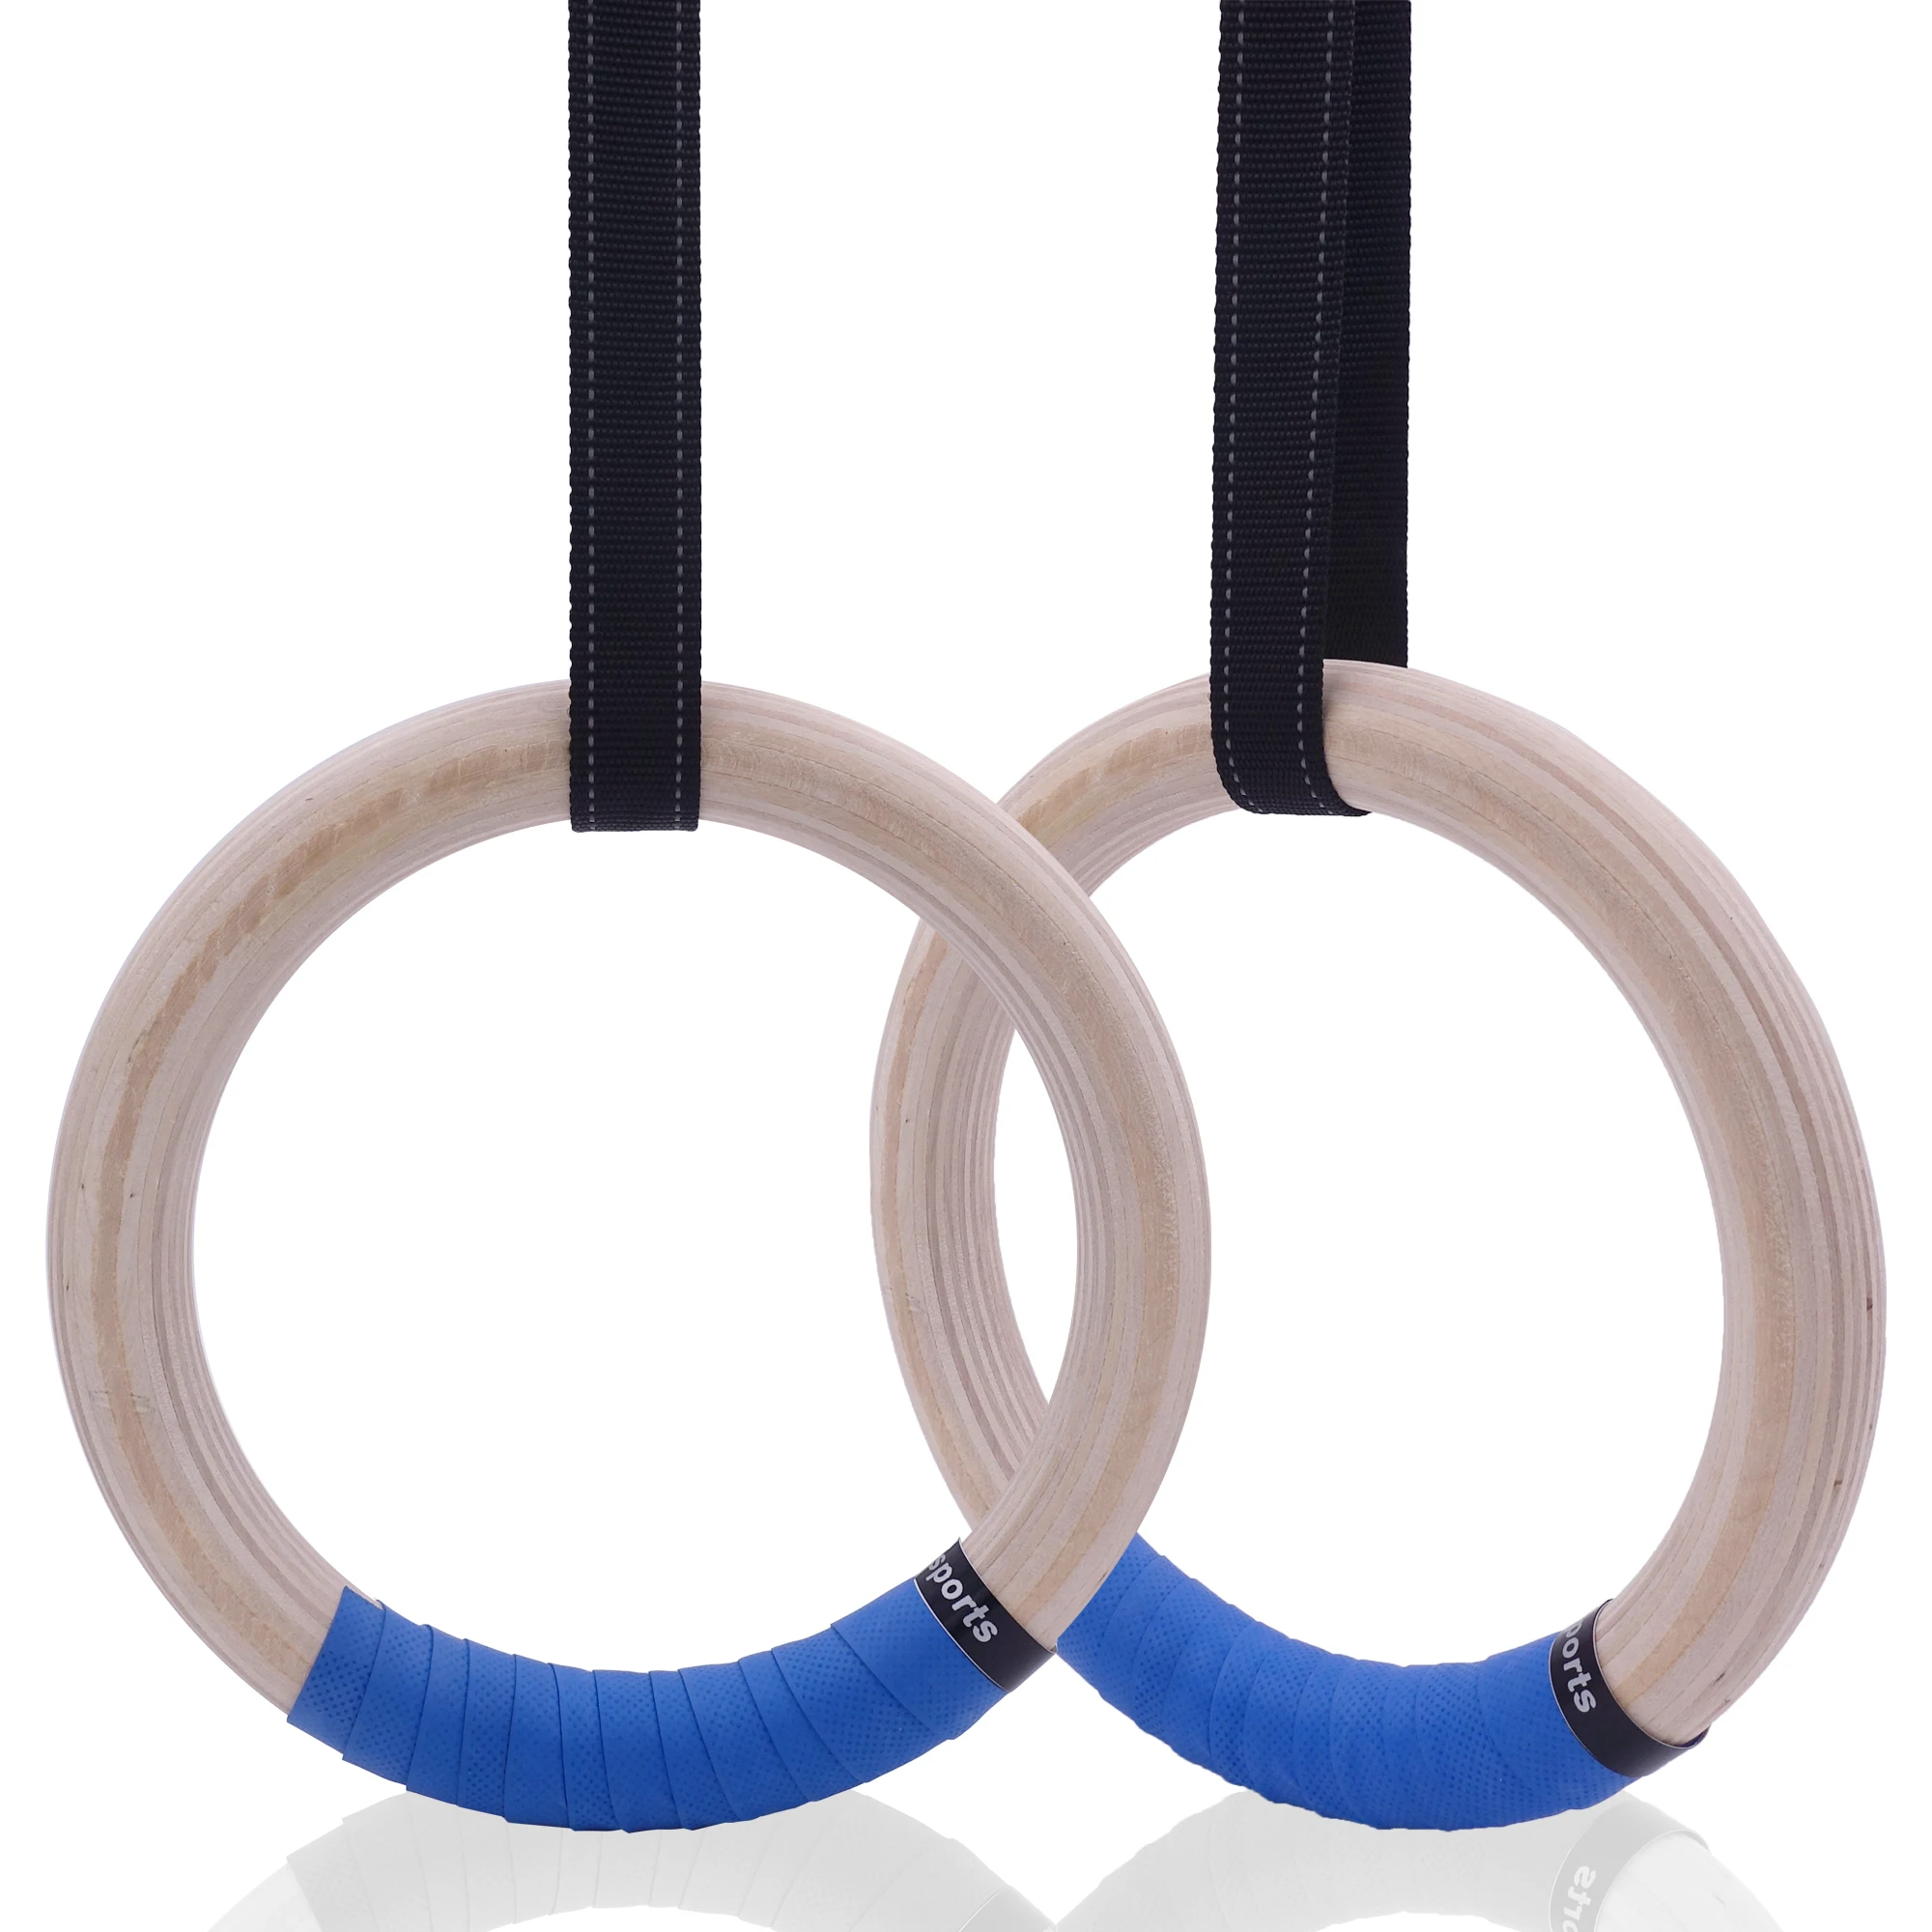 

Wooden 28/32 mm Gymnastic Ring with Adjustable Straps Crossfit Home Gym Fitness Pull Ups Strength Training Gymnastics Equipment